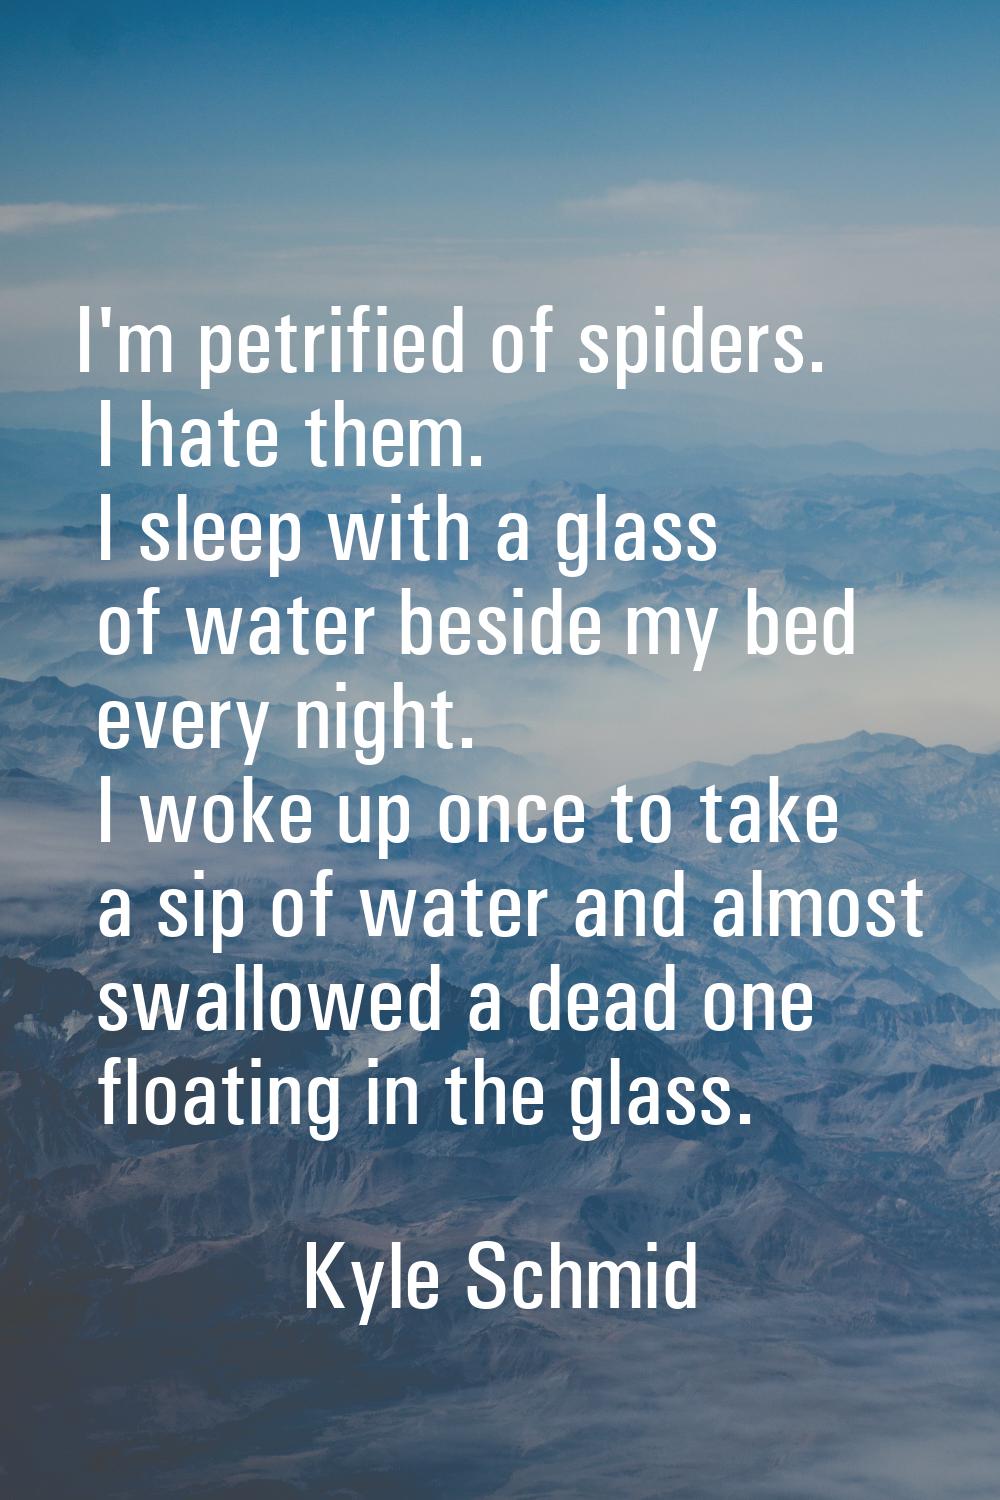 I'm petrified of spiders. I hate them. I sleep with a glass of water beside my bed every night. I w